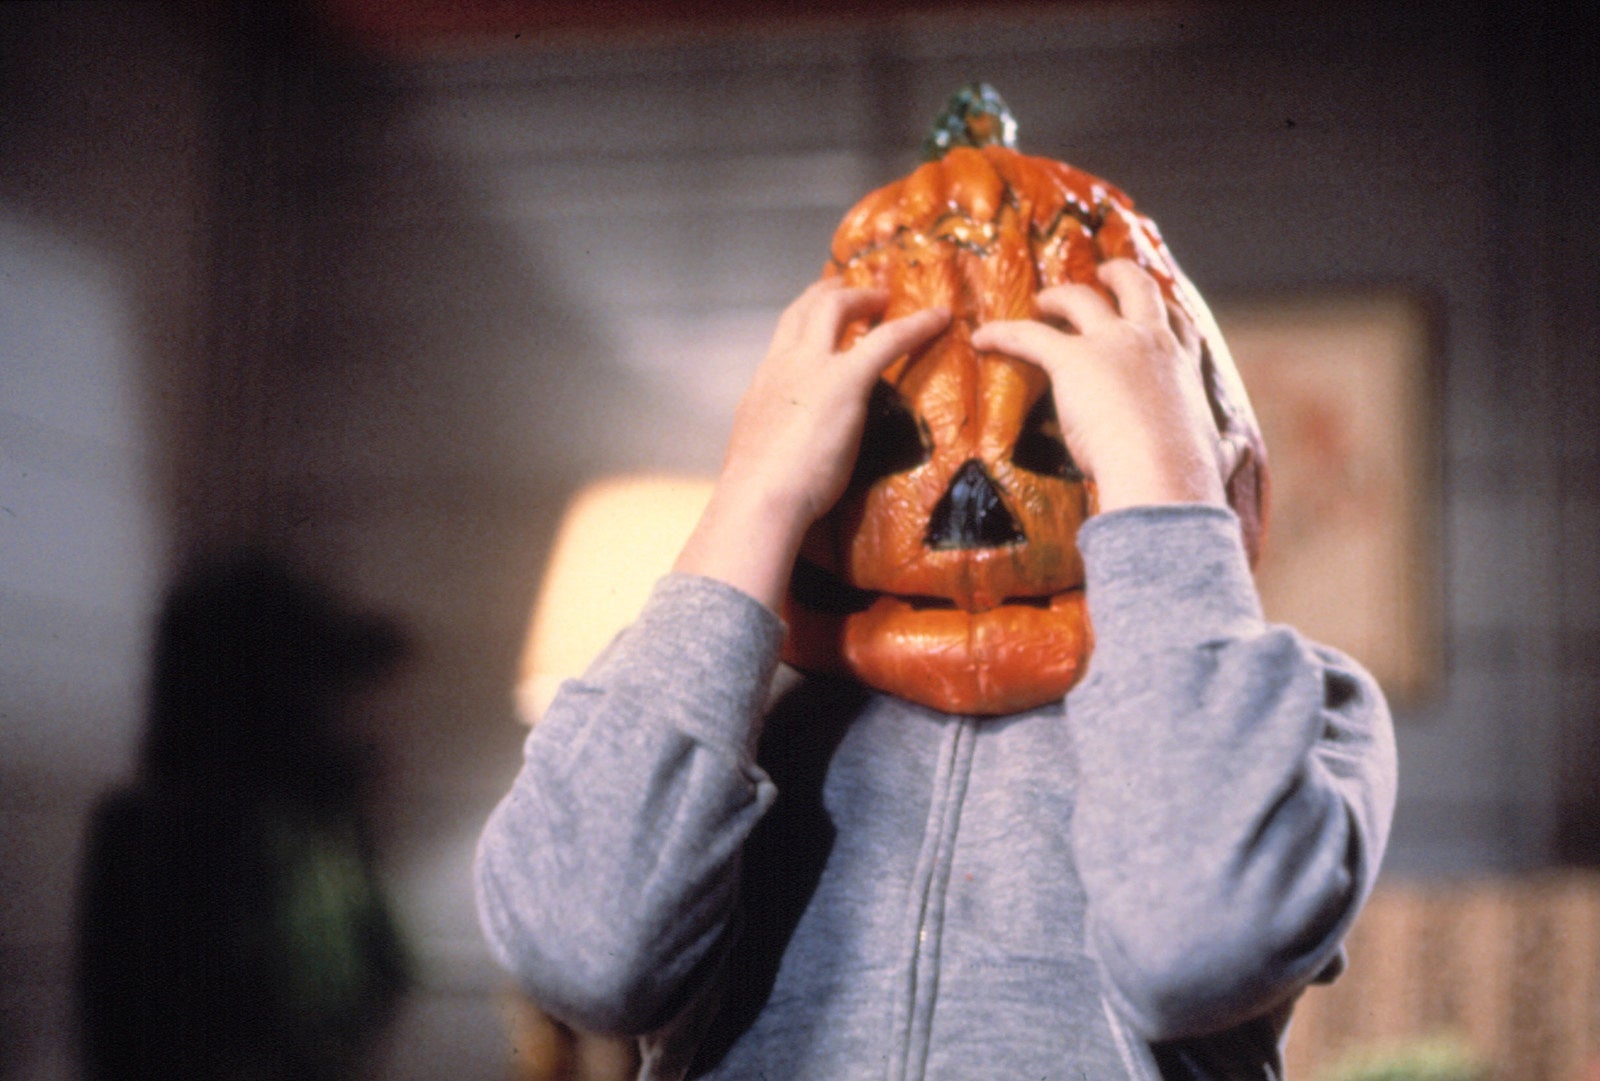 Every Movie In The "Halloween" Series, Ranked From Worst To Best